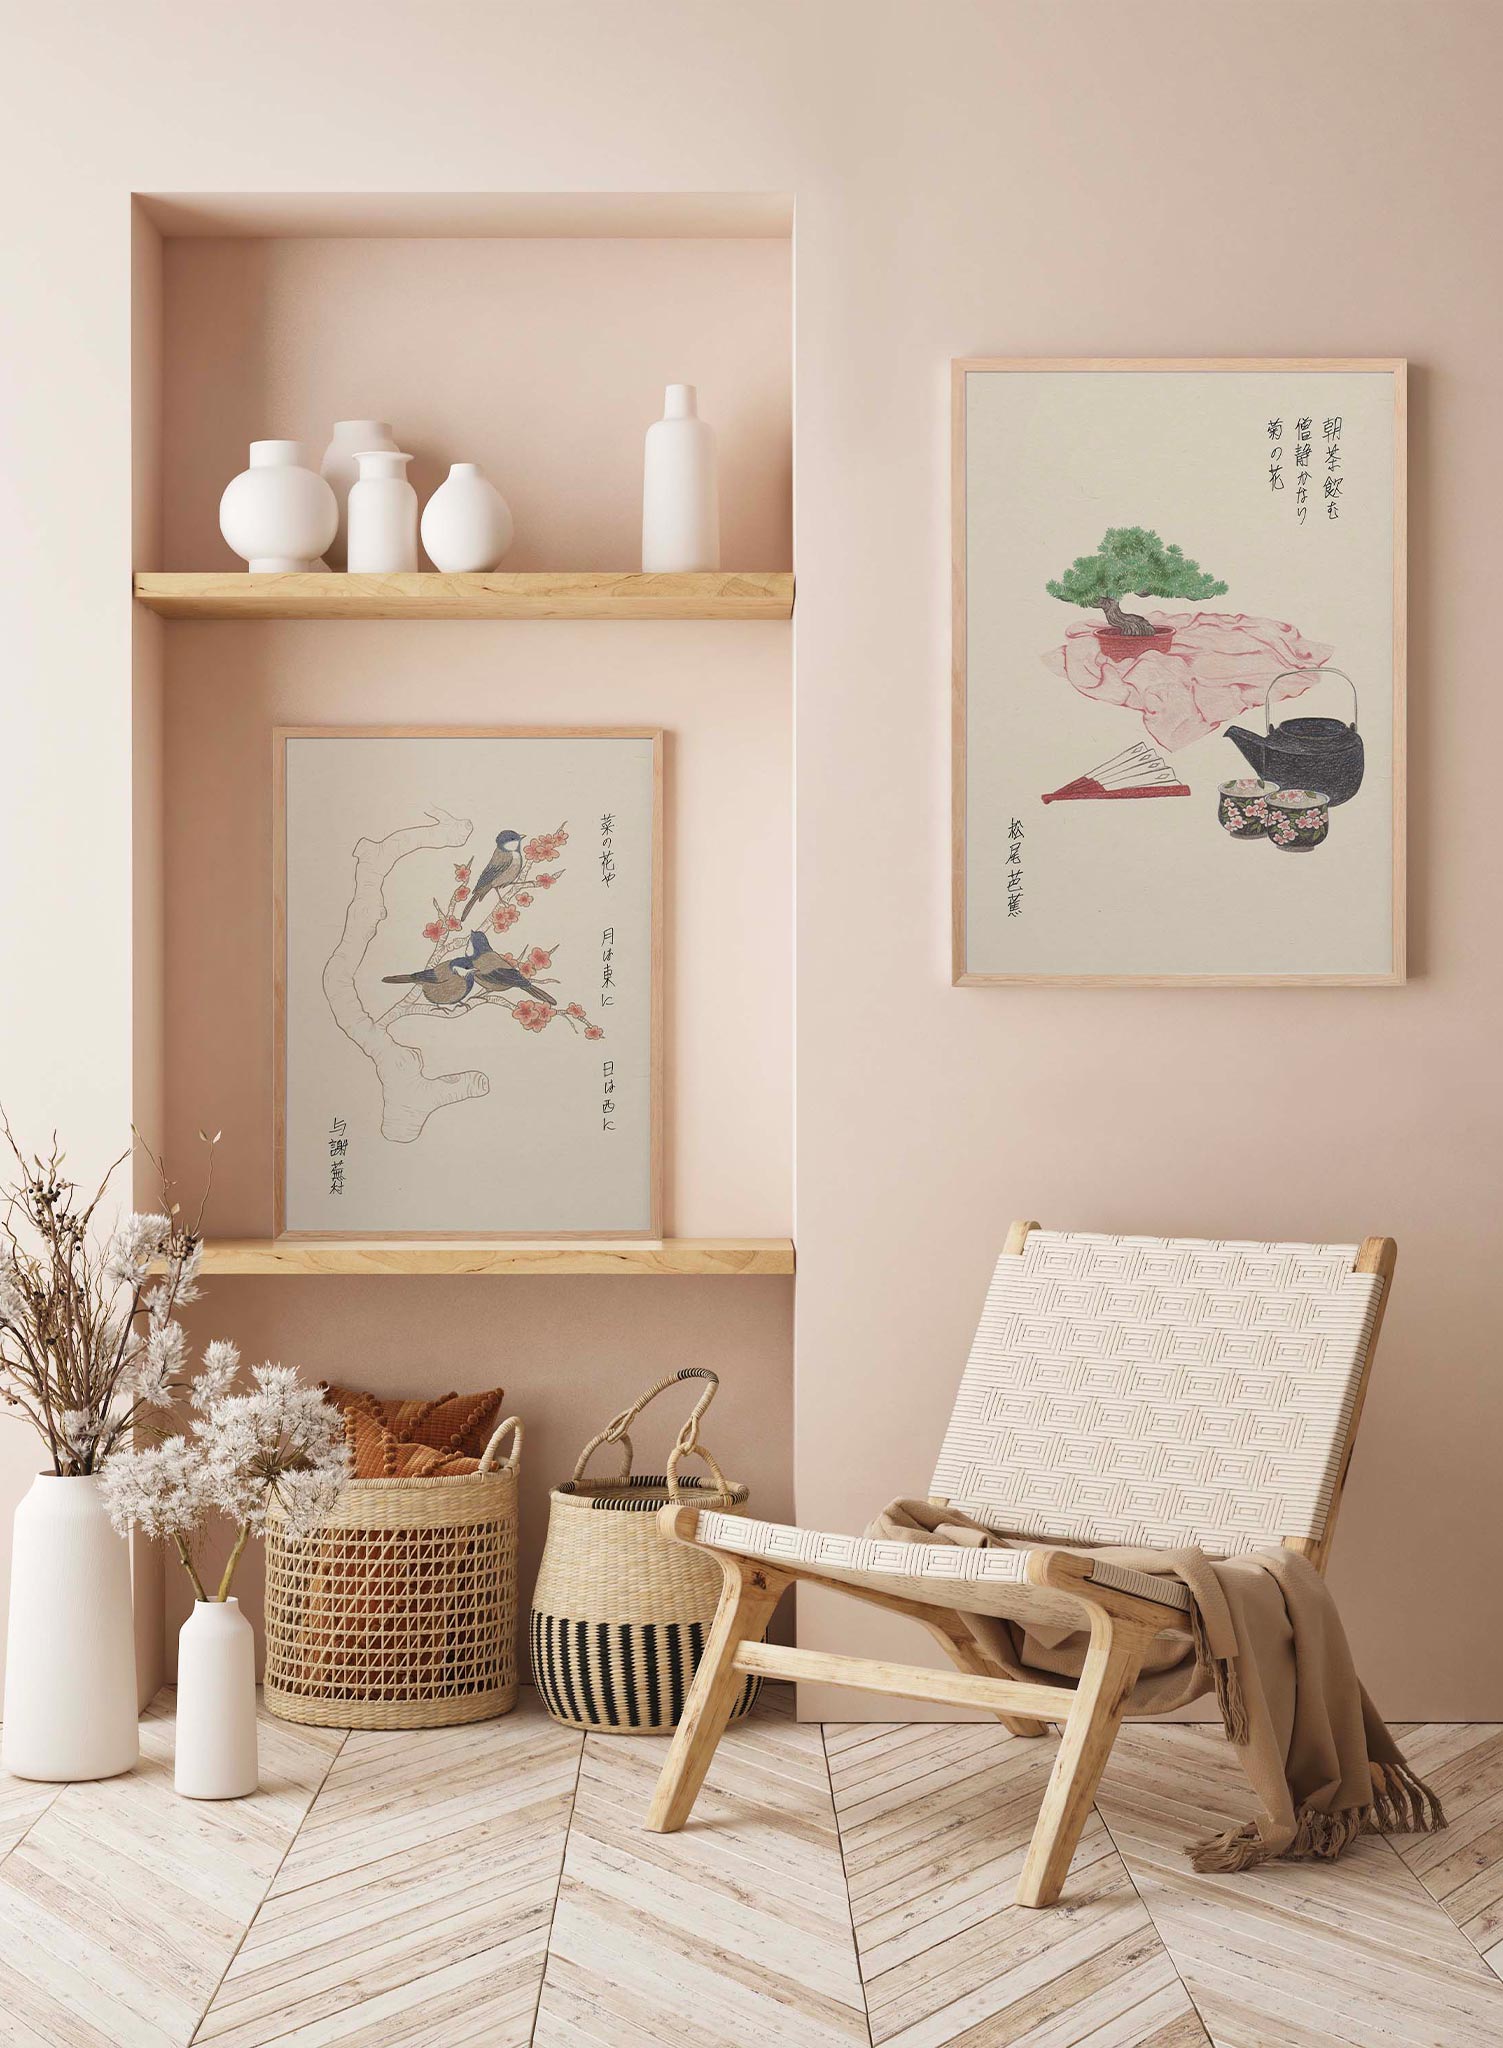 Tradition is a minimalist illustration by Opposite Wall of a small bonsai tree next to a tea set and a fan.